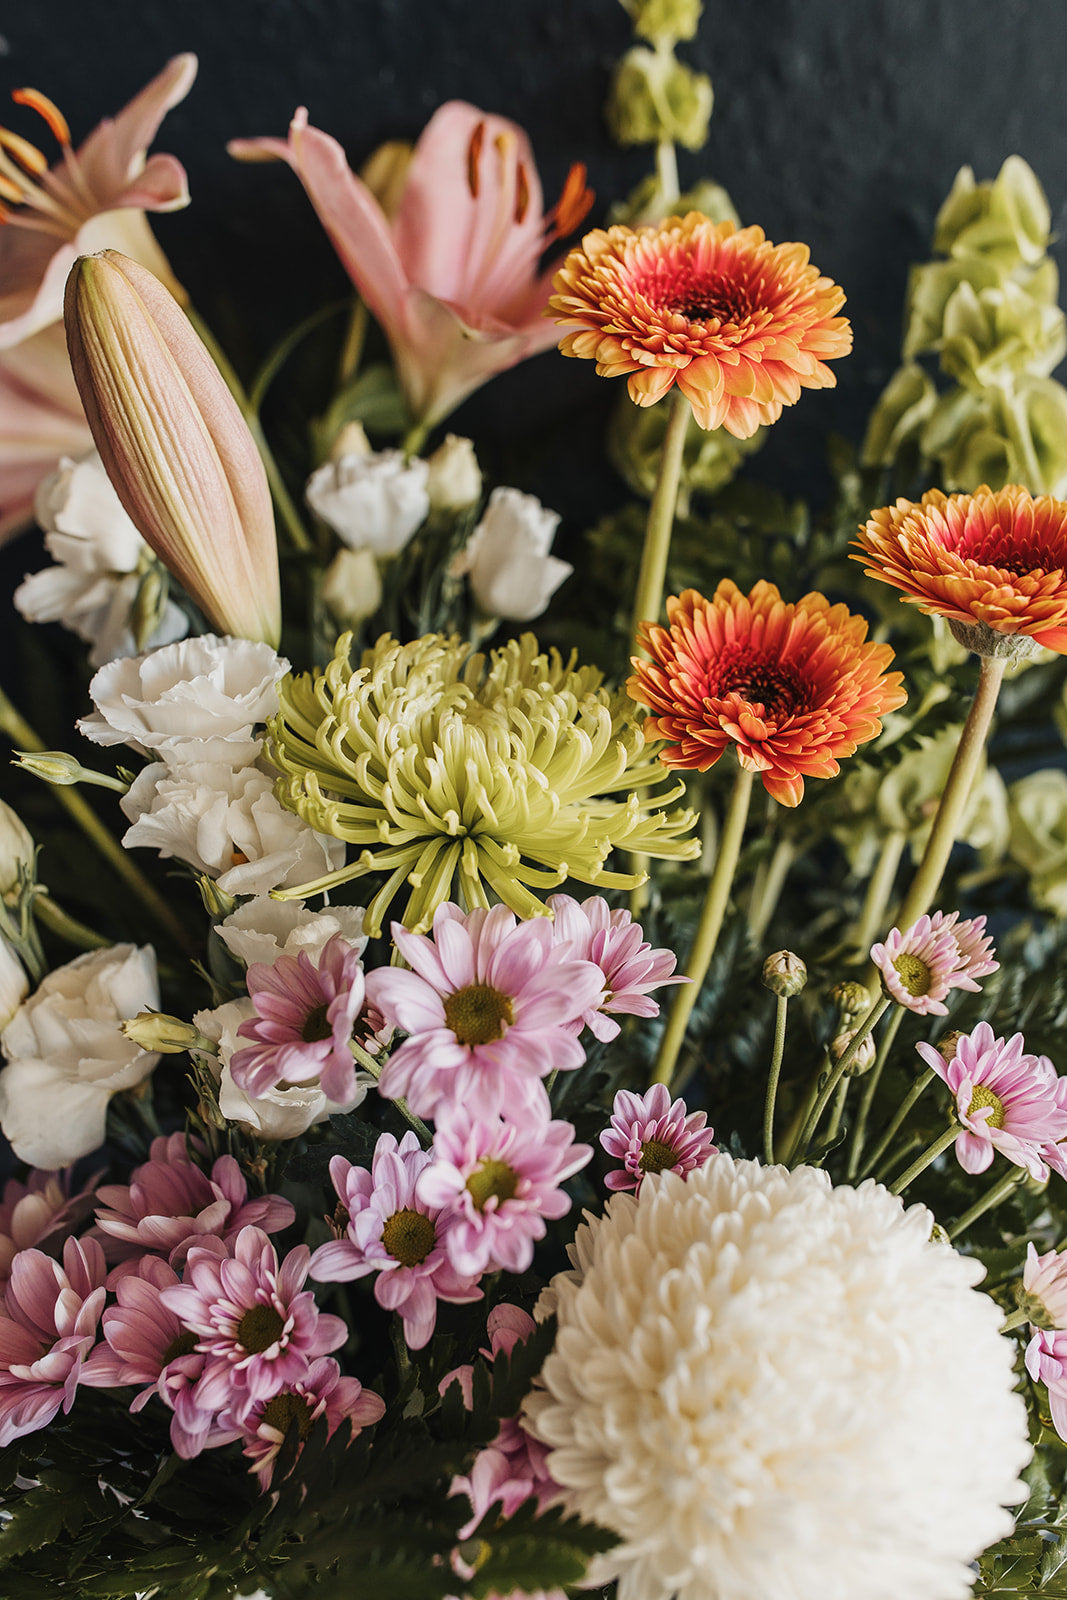 A tight close up view of the chrysanthemums, gerberas, lisianthus and lilies